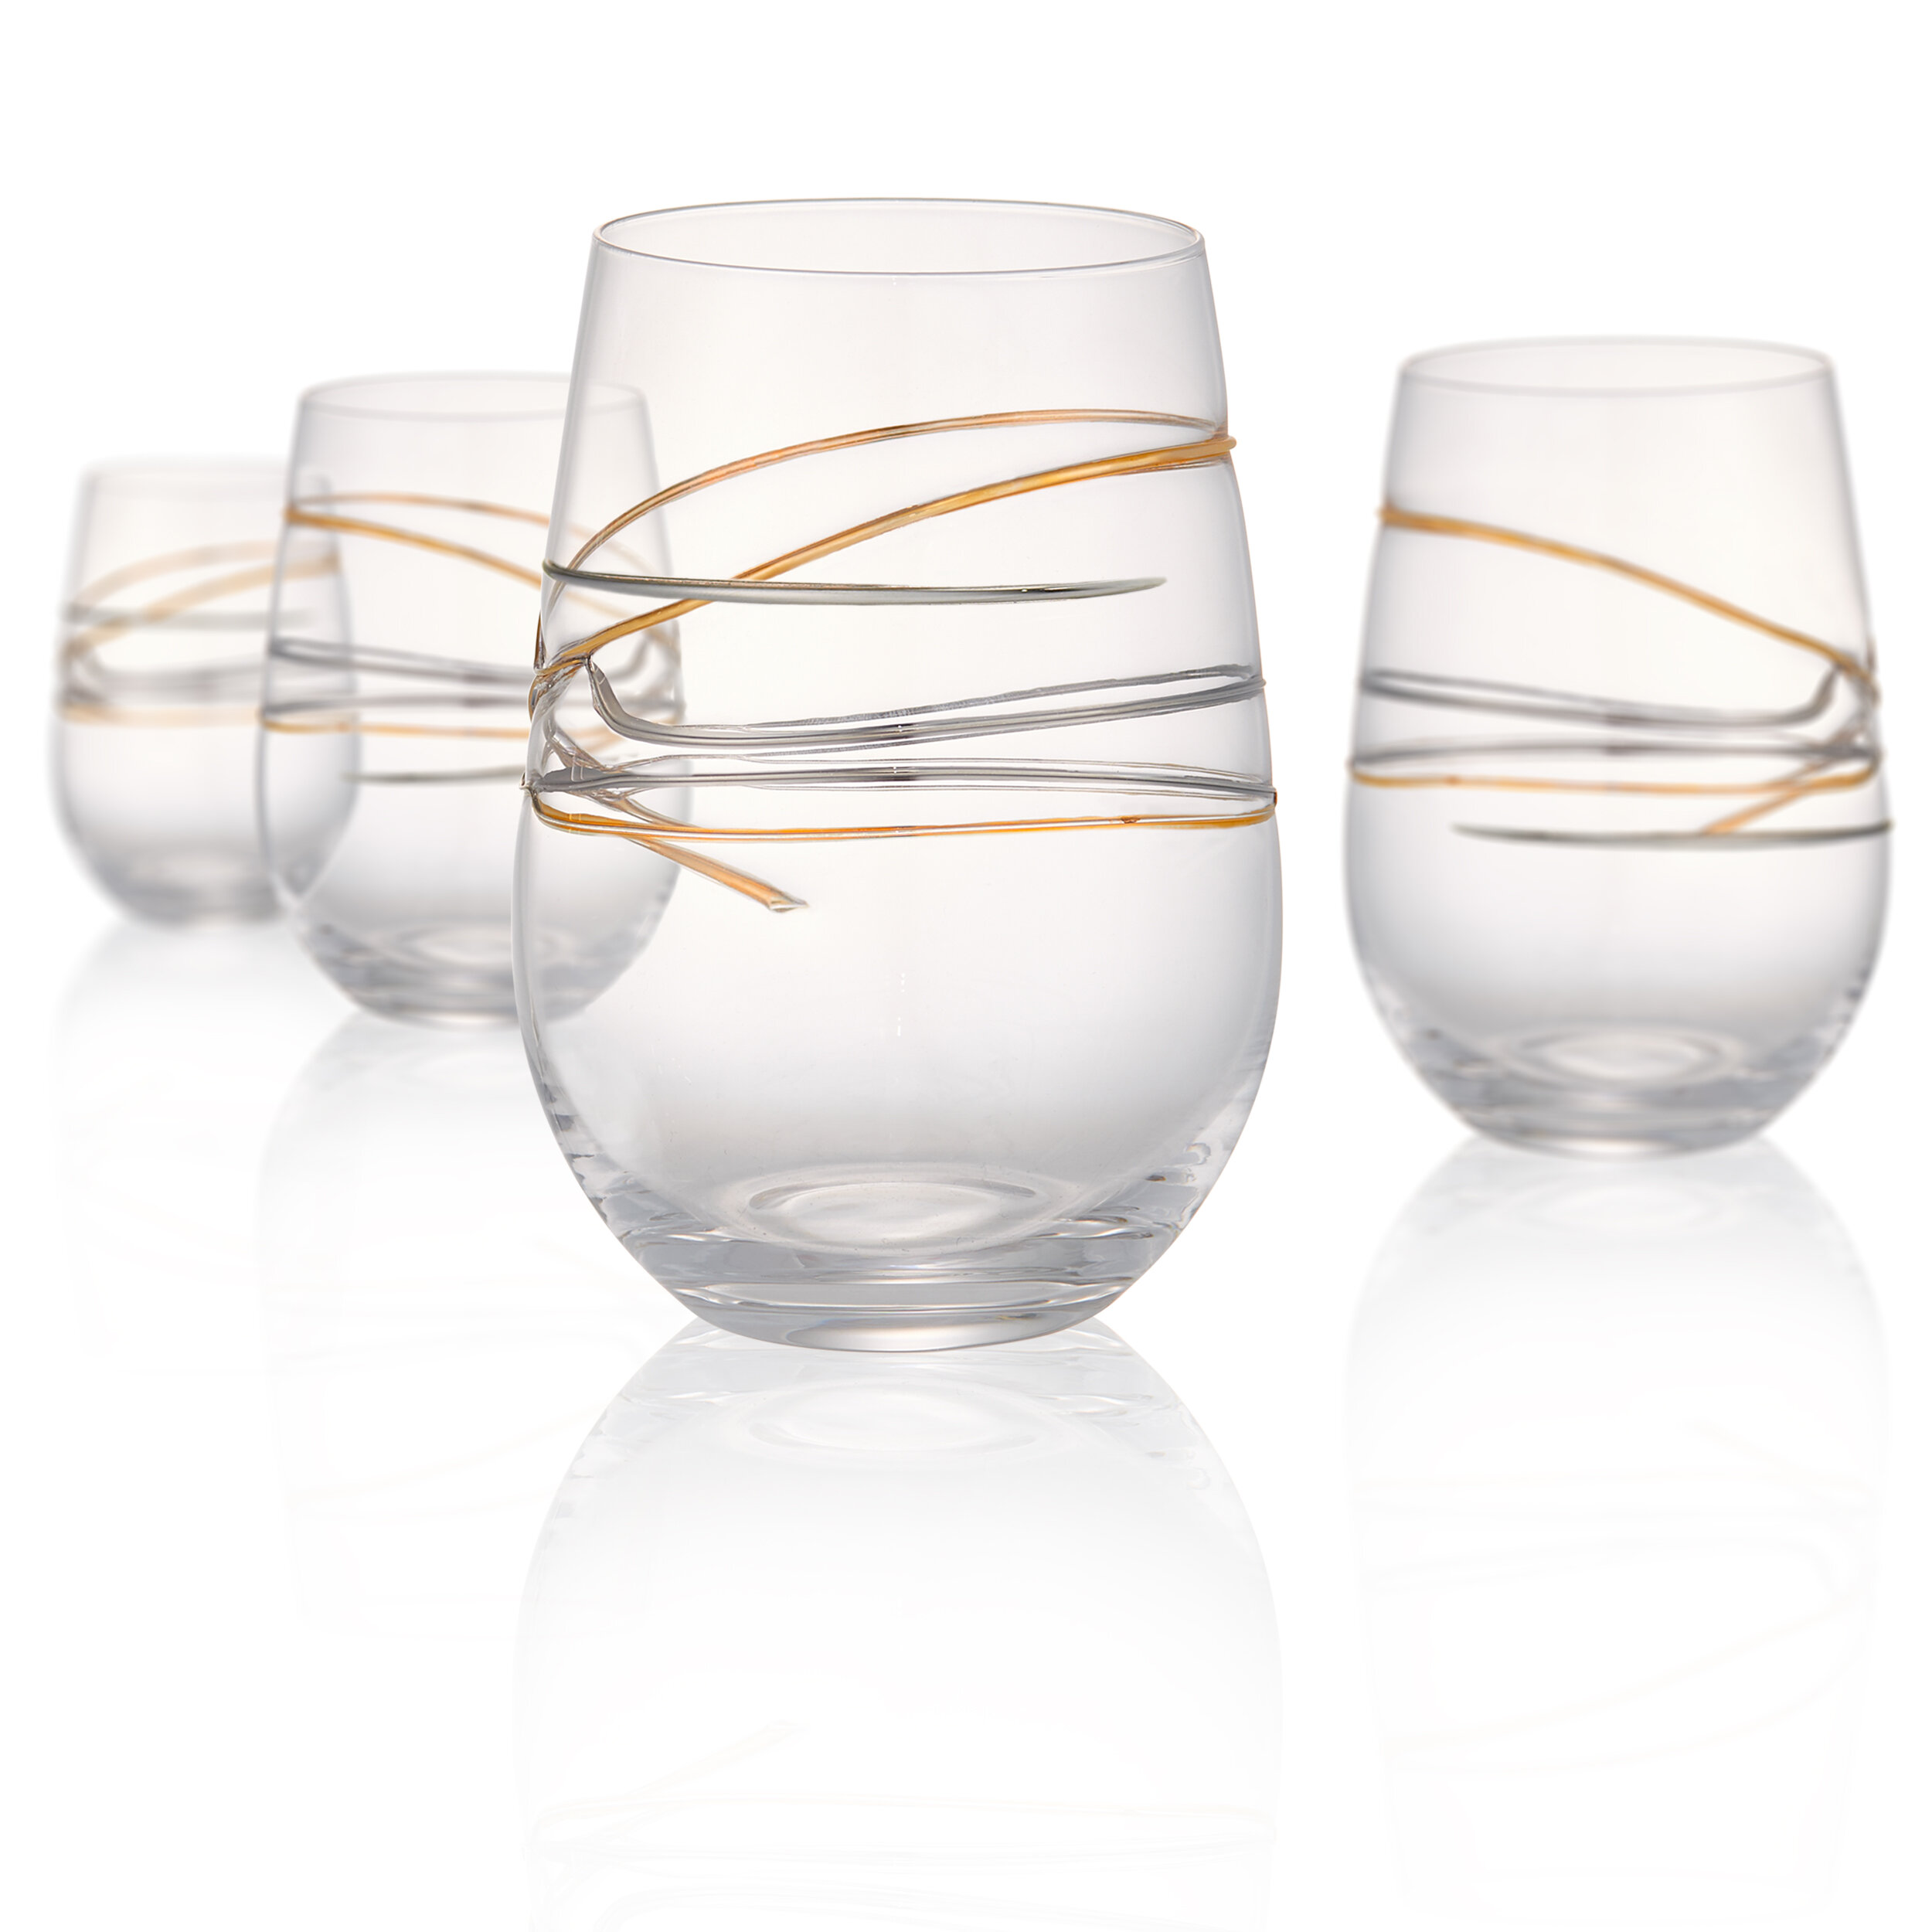 For Medicinal Purposes Only Stemless Wine Glass Set of 2 17 oz 4 1/2 Inch